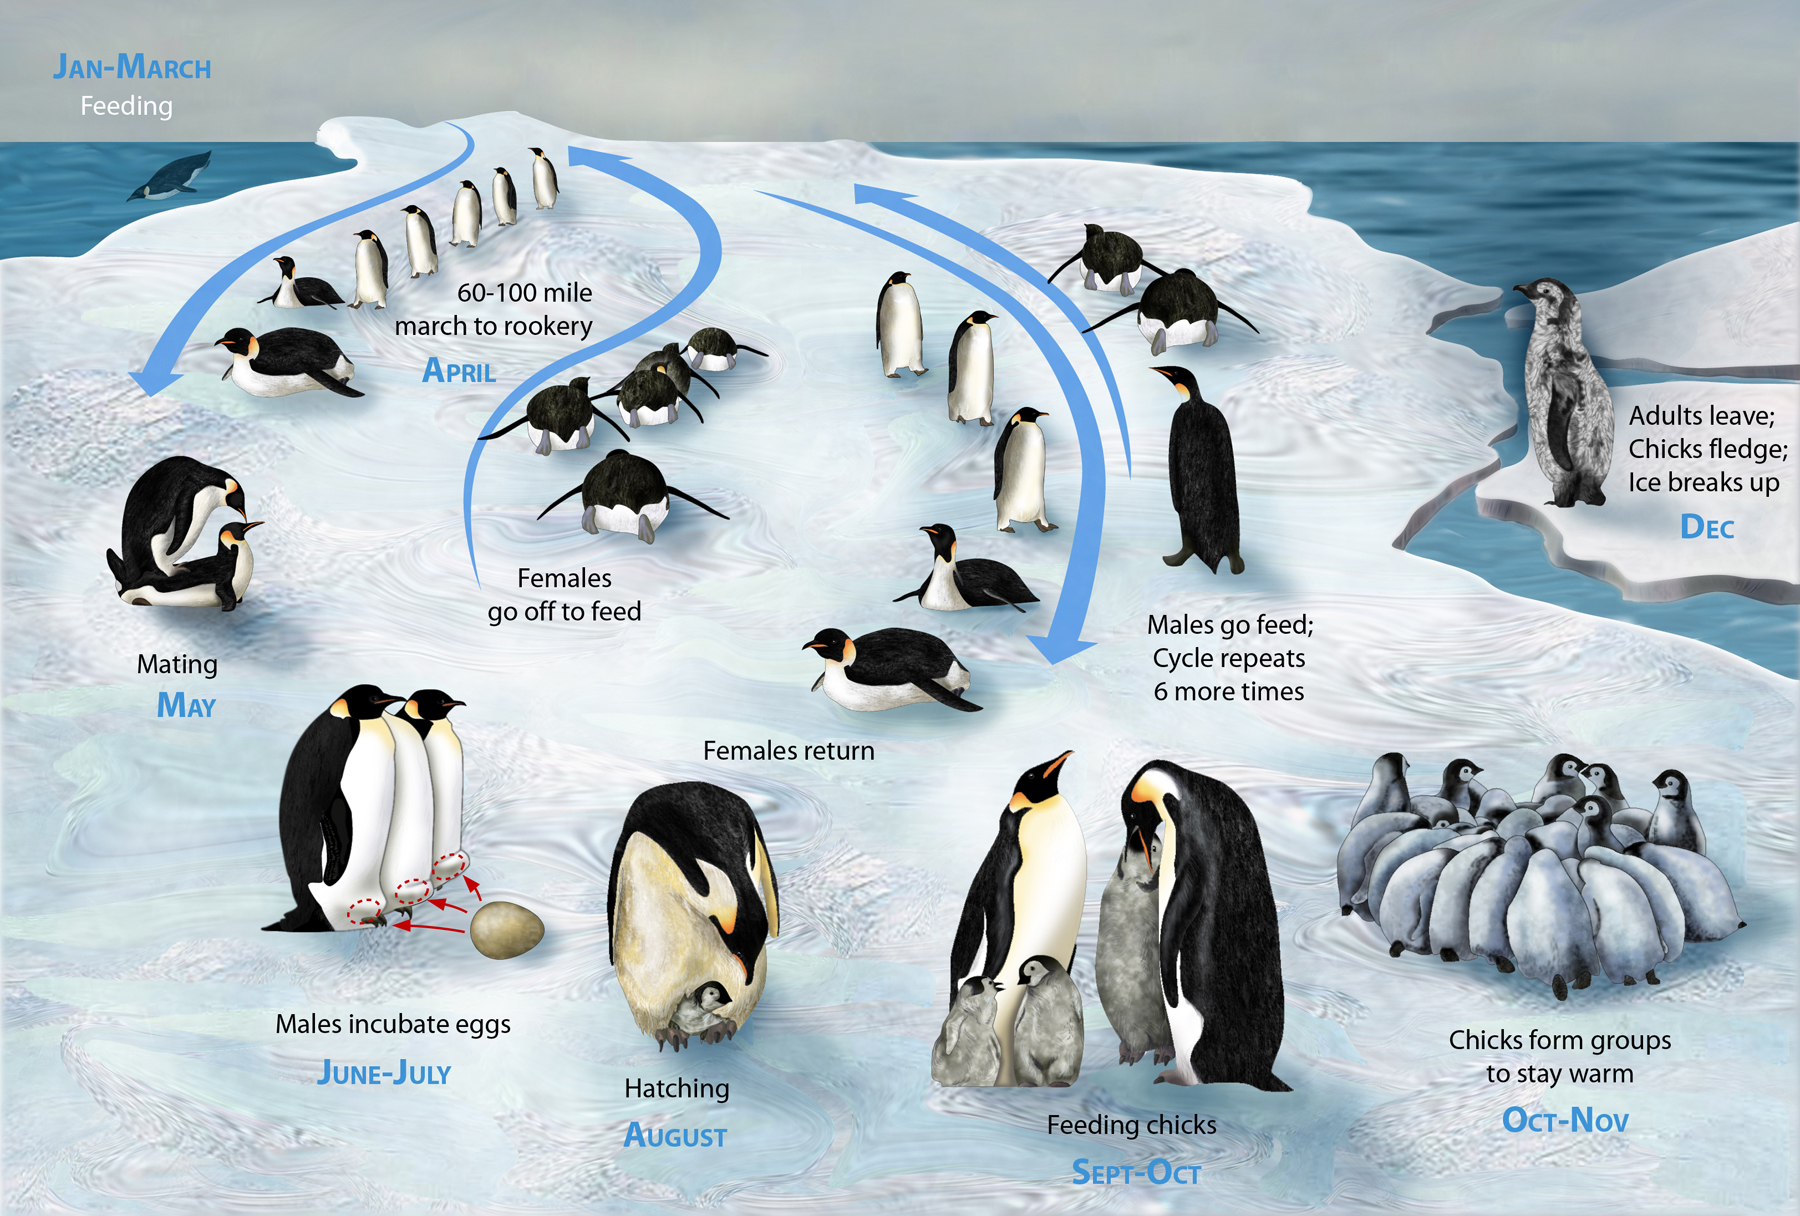 Poster of emperor penguin life cycle.